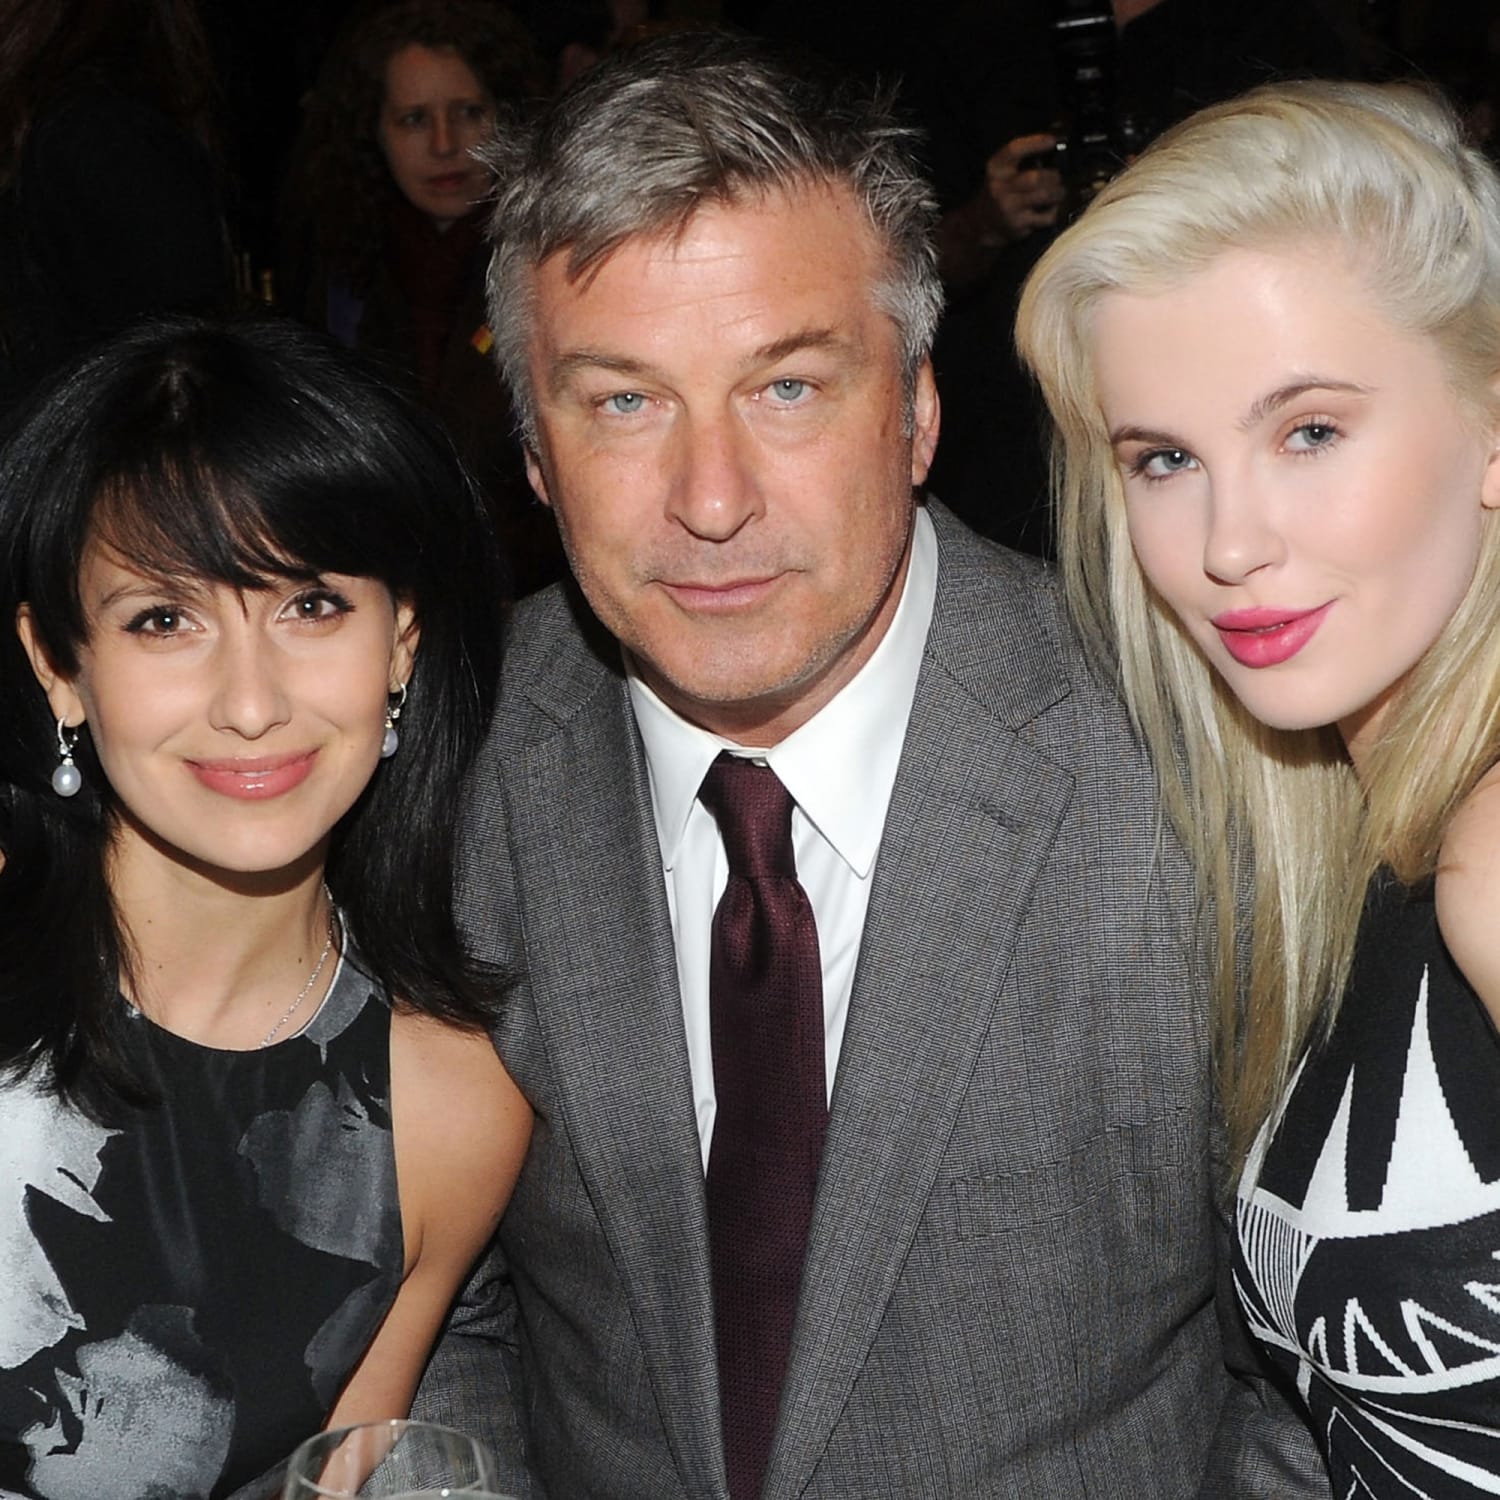 Hilaria Baldwin Says She Loves Stepdaughter As Much As I Love My Biological Kids